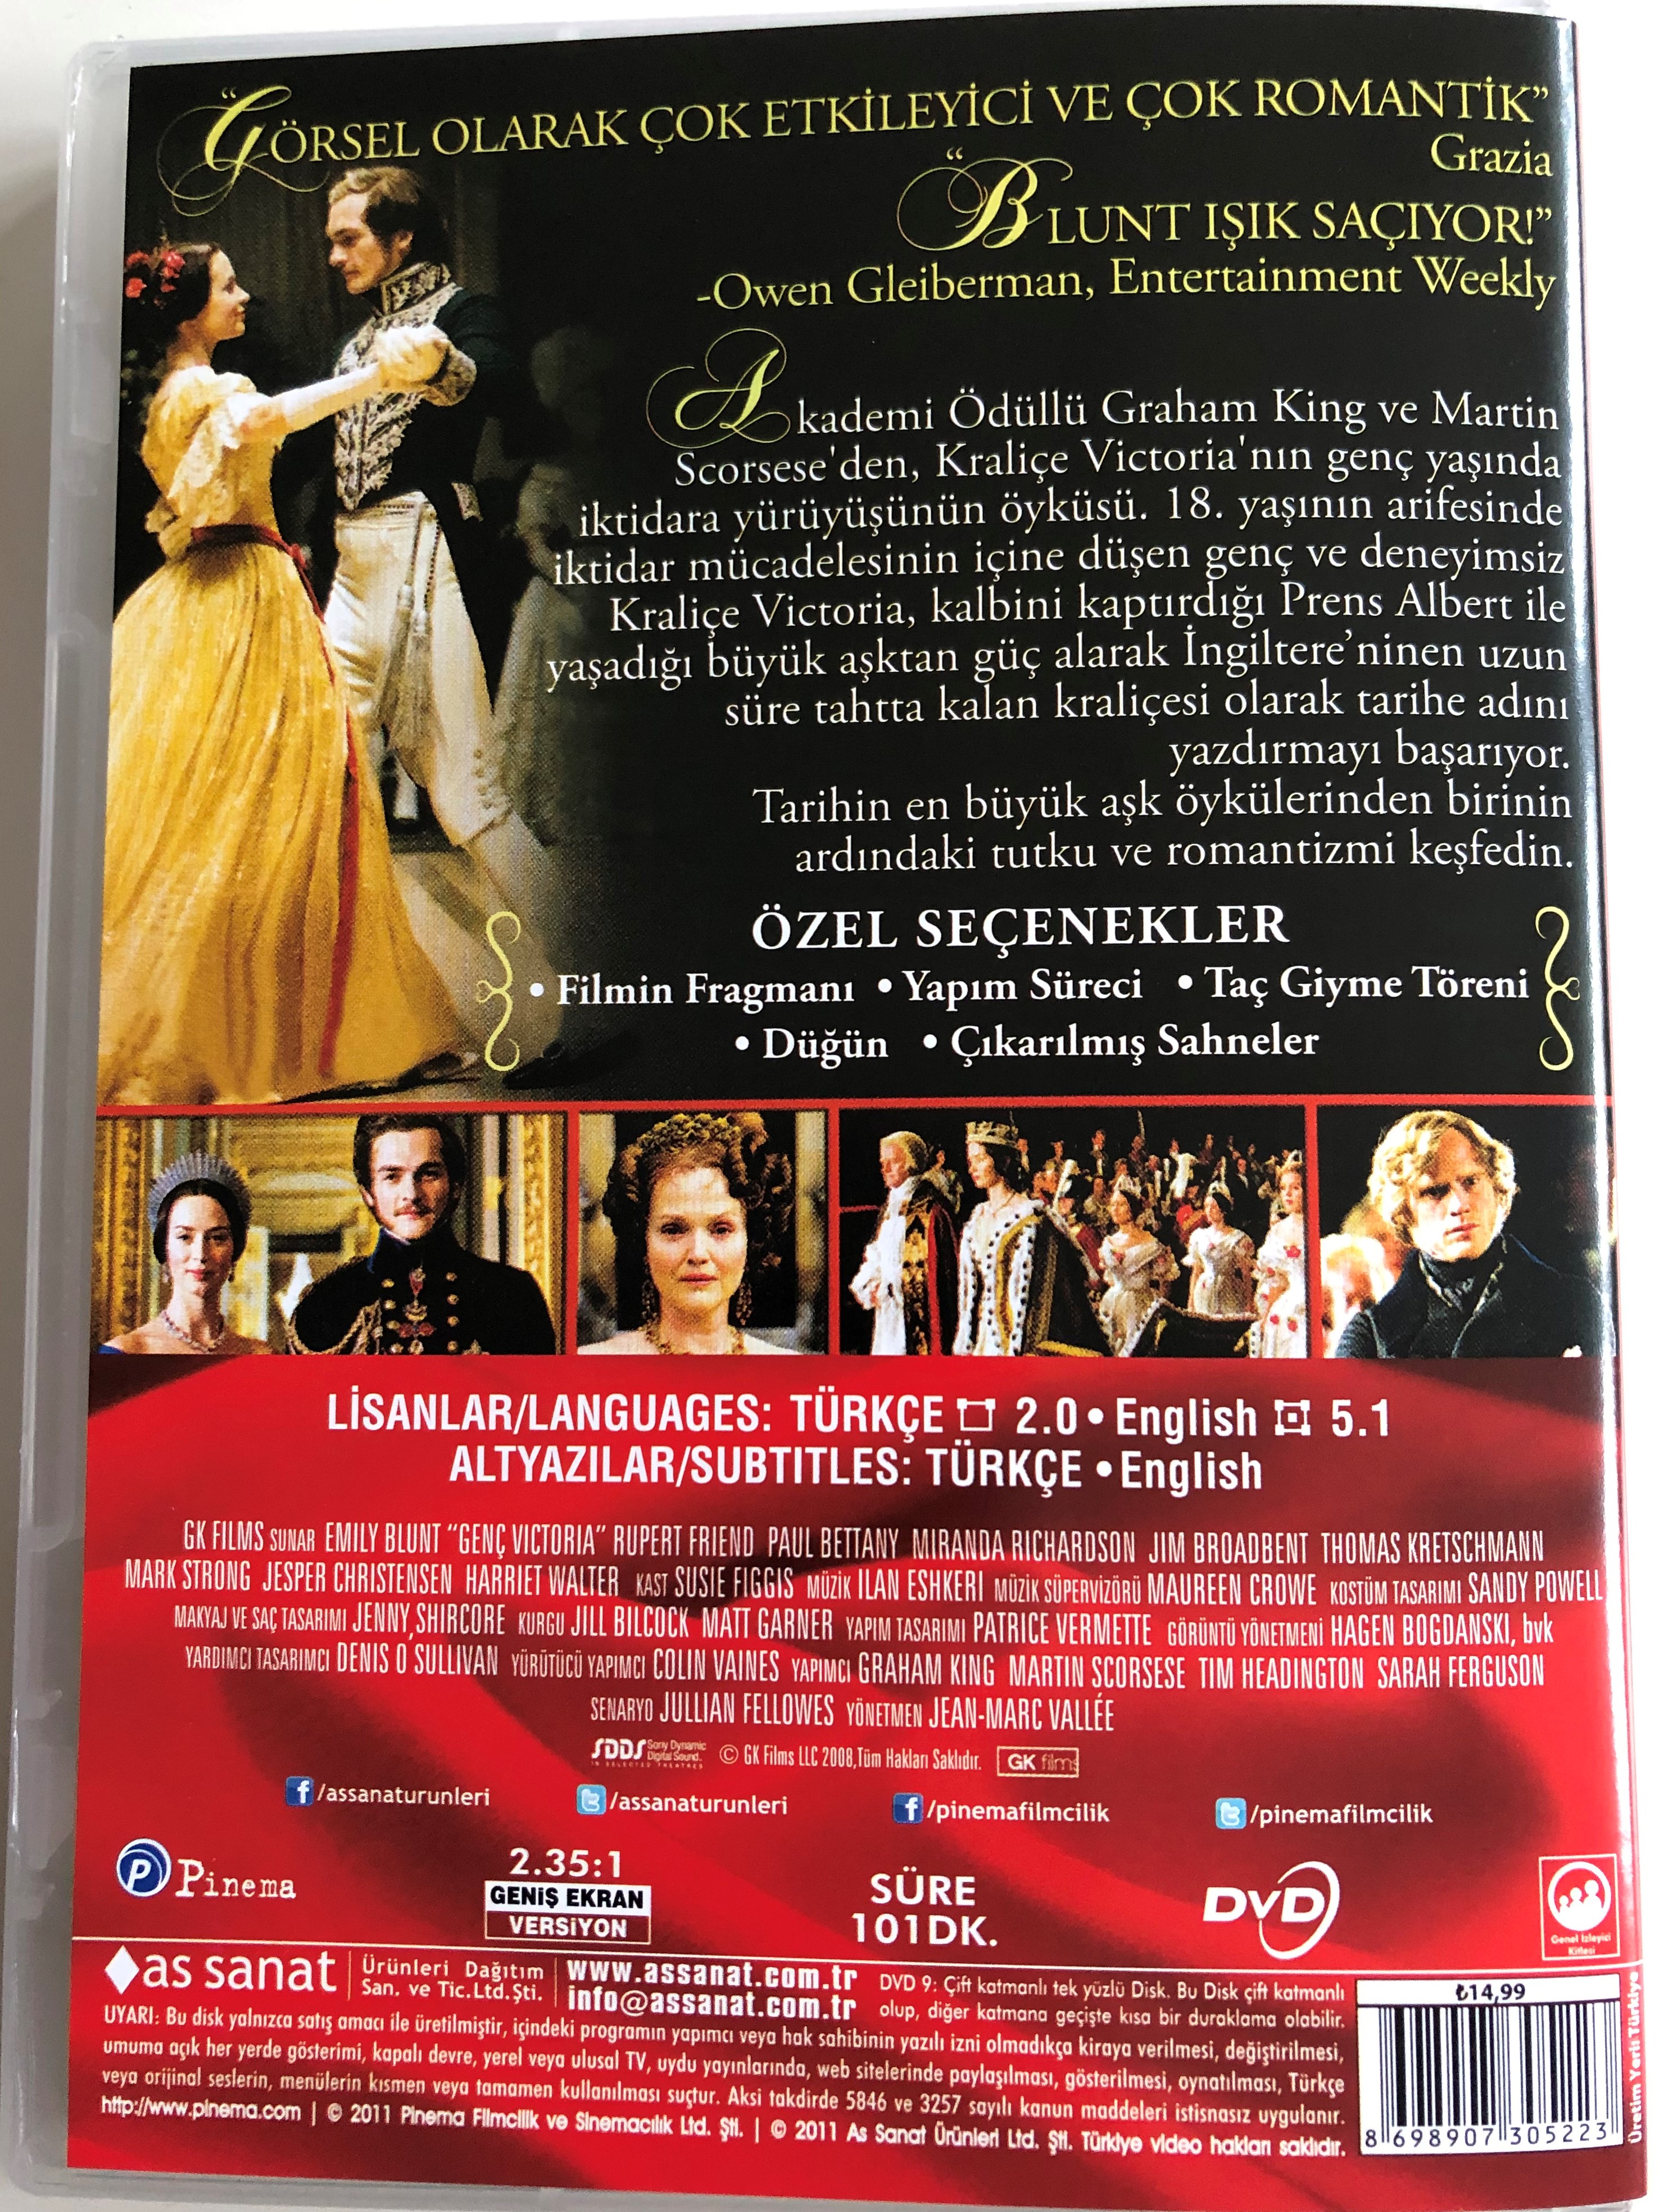 the-young-victoria-dvd-2009-gen-victoria-directed-by-jean-marc-vall-e-2.jpg